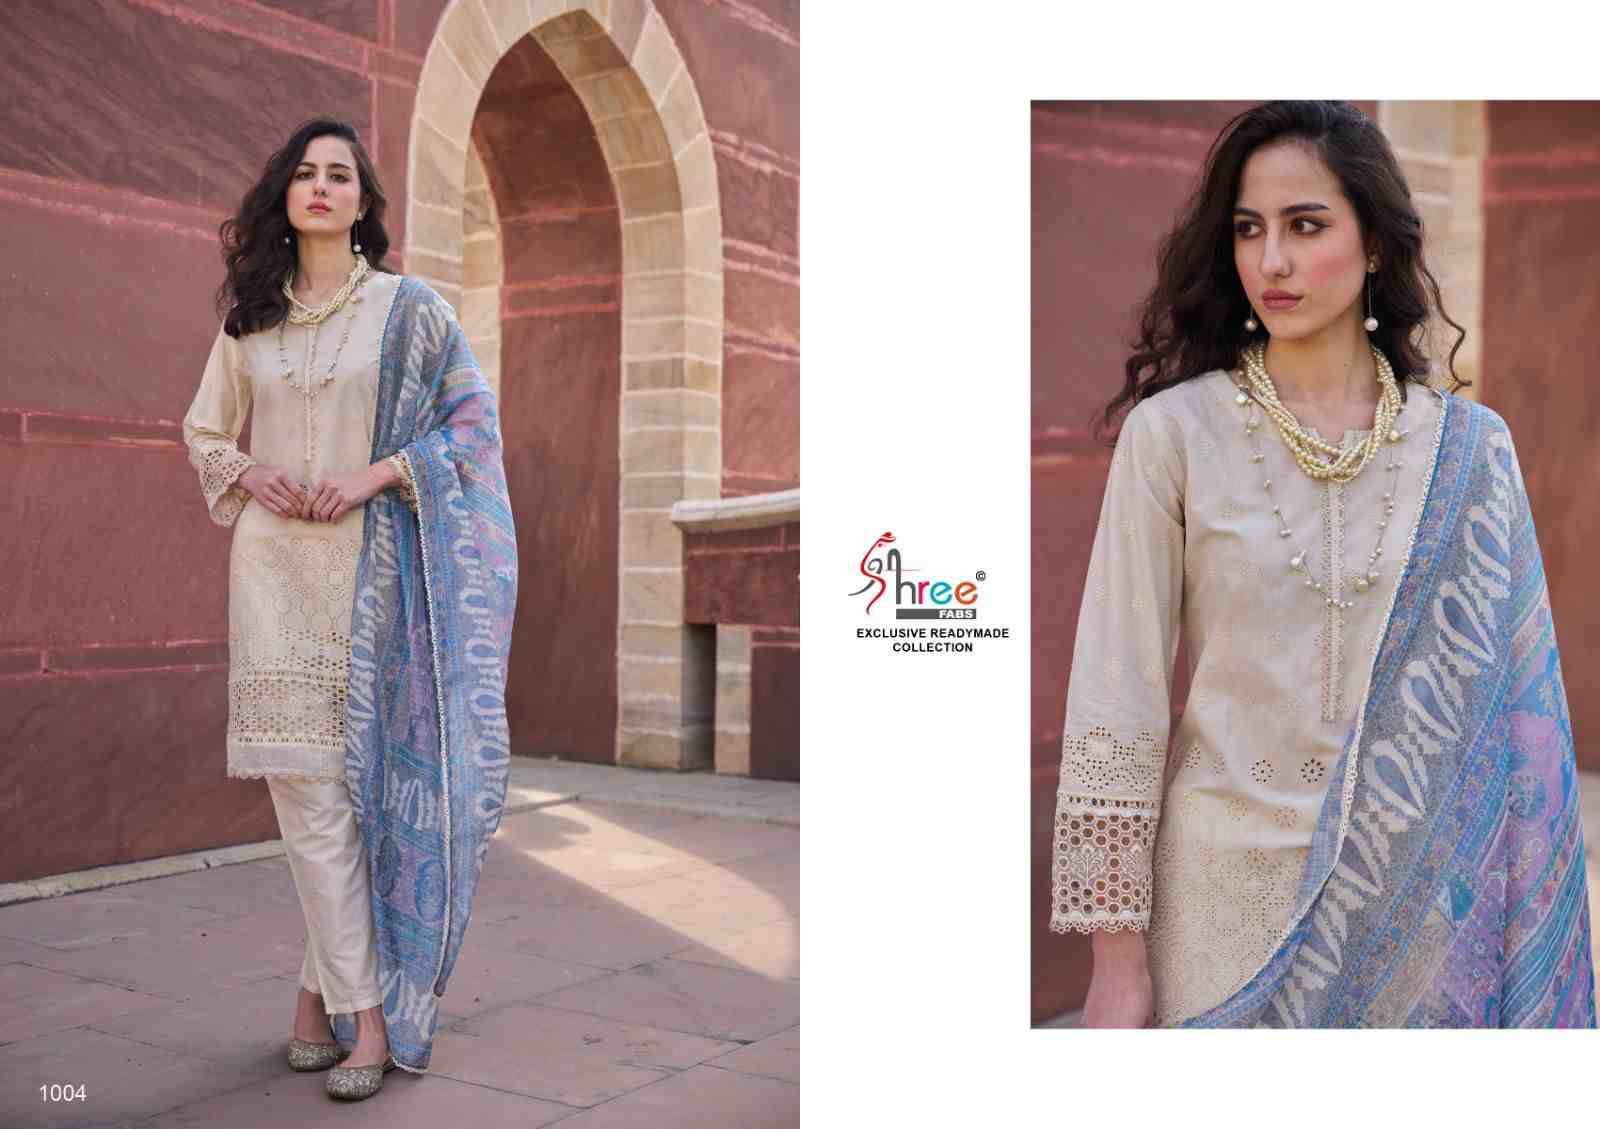 Mariya.B. Exclusive Readymade Collection By Shree Fabs 1001 To 1004 Series Beautiful Pakistani Suits Stylish Fancy Colorful Party Wear & Occasional Wear Pure Lawn Cotton With Embroidery Dresses At Wholesale Price